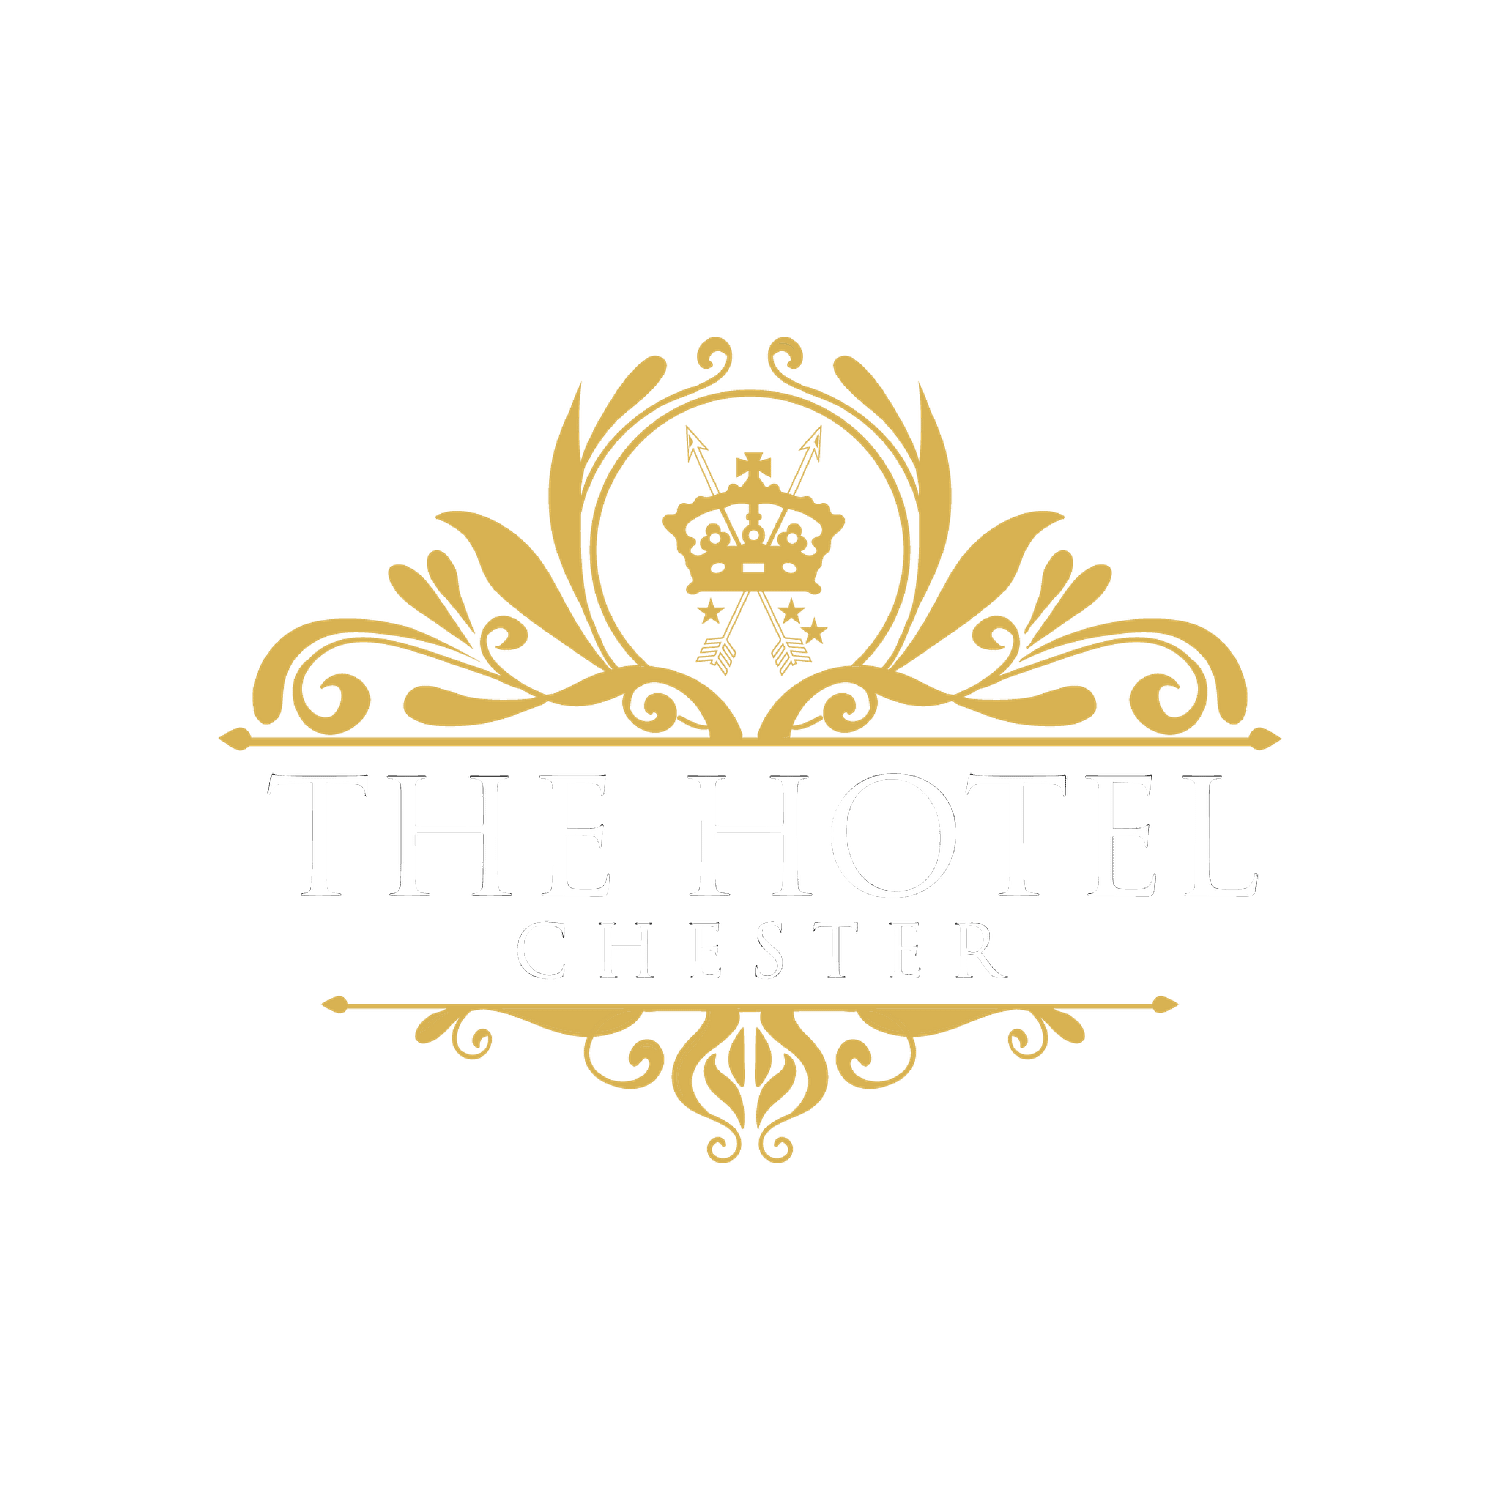 The Hotel Chester